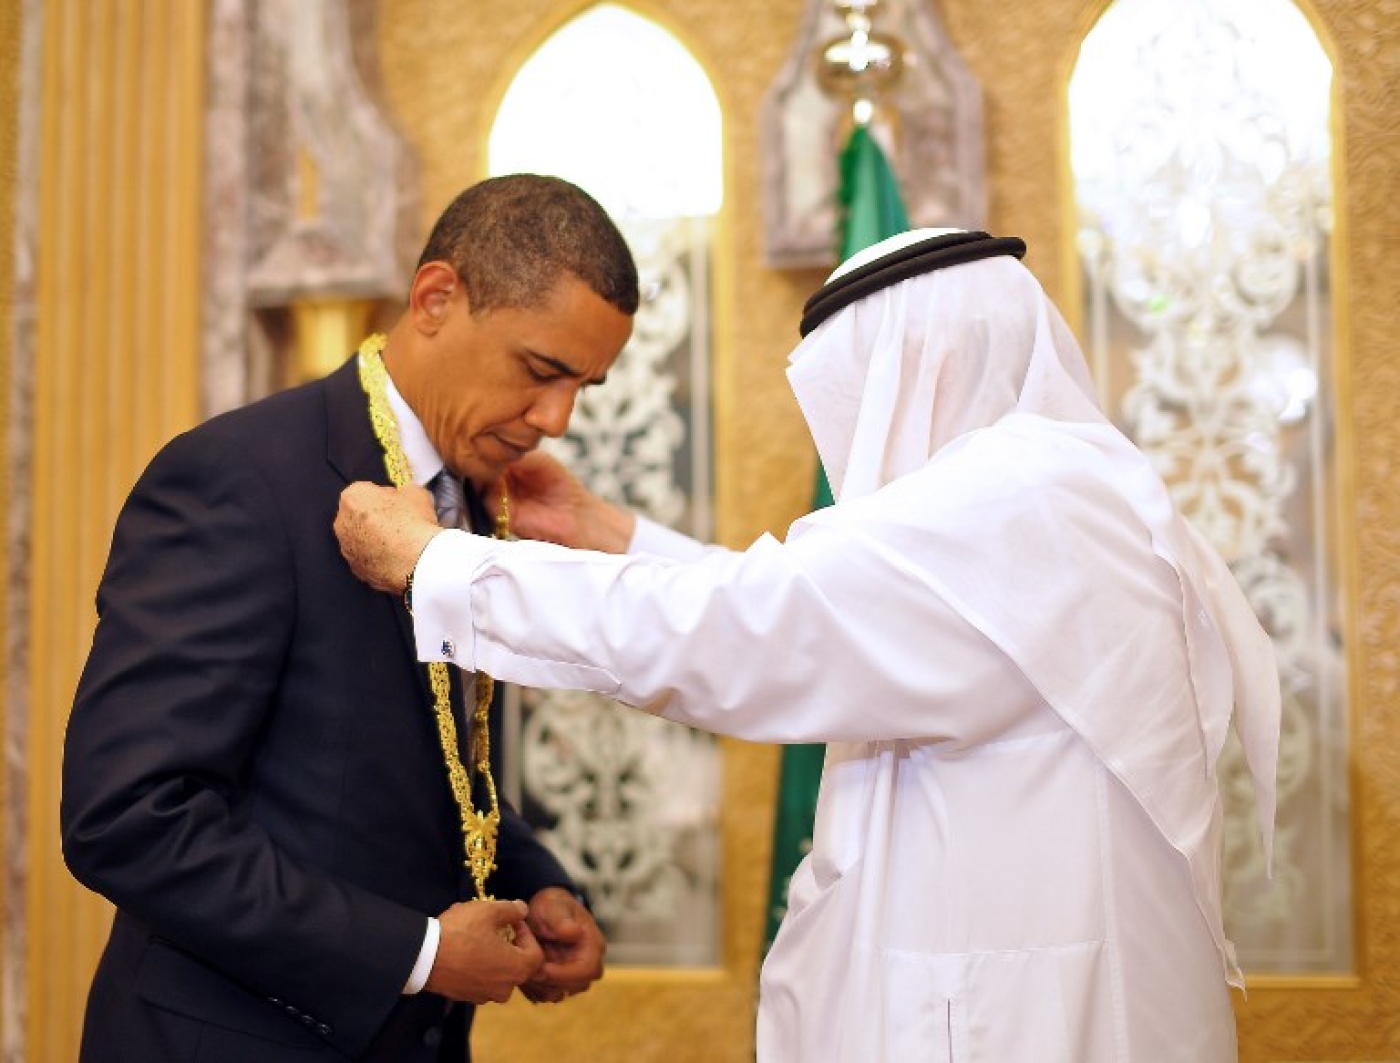 Saudi government gave Obama aides 'suitcases full of jewels', says  ex-official | Middle East Eye